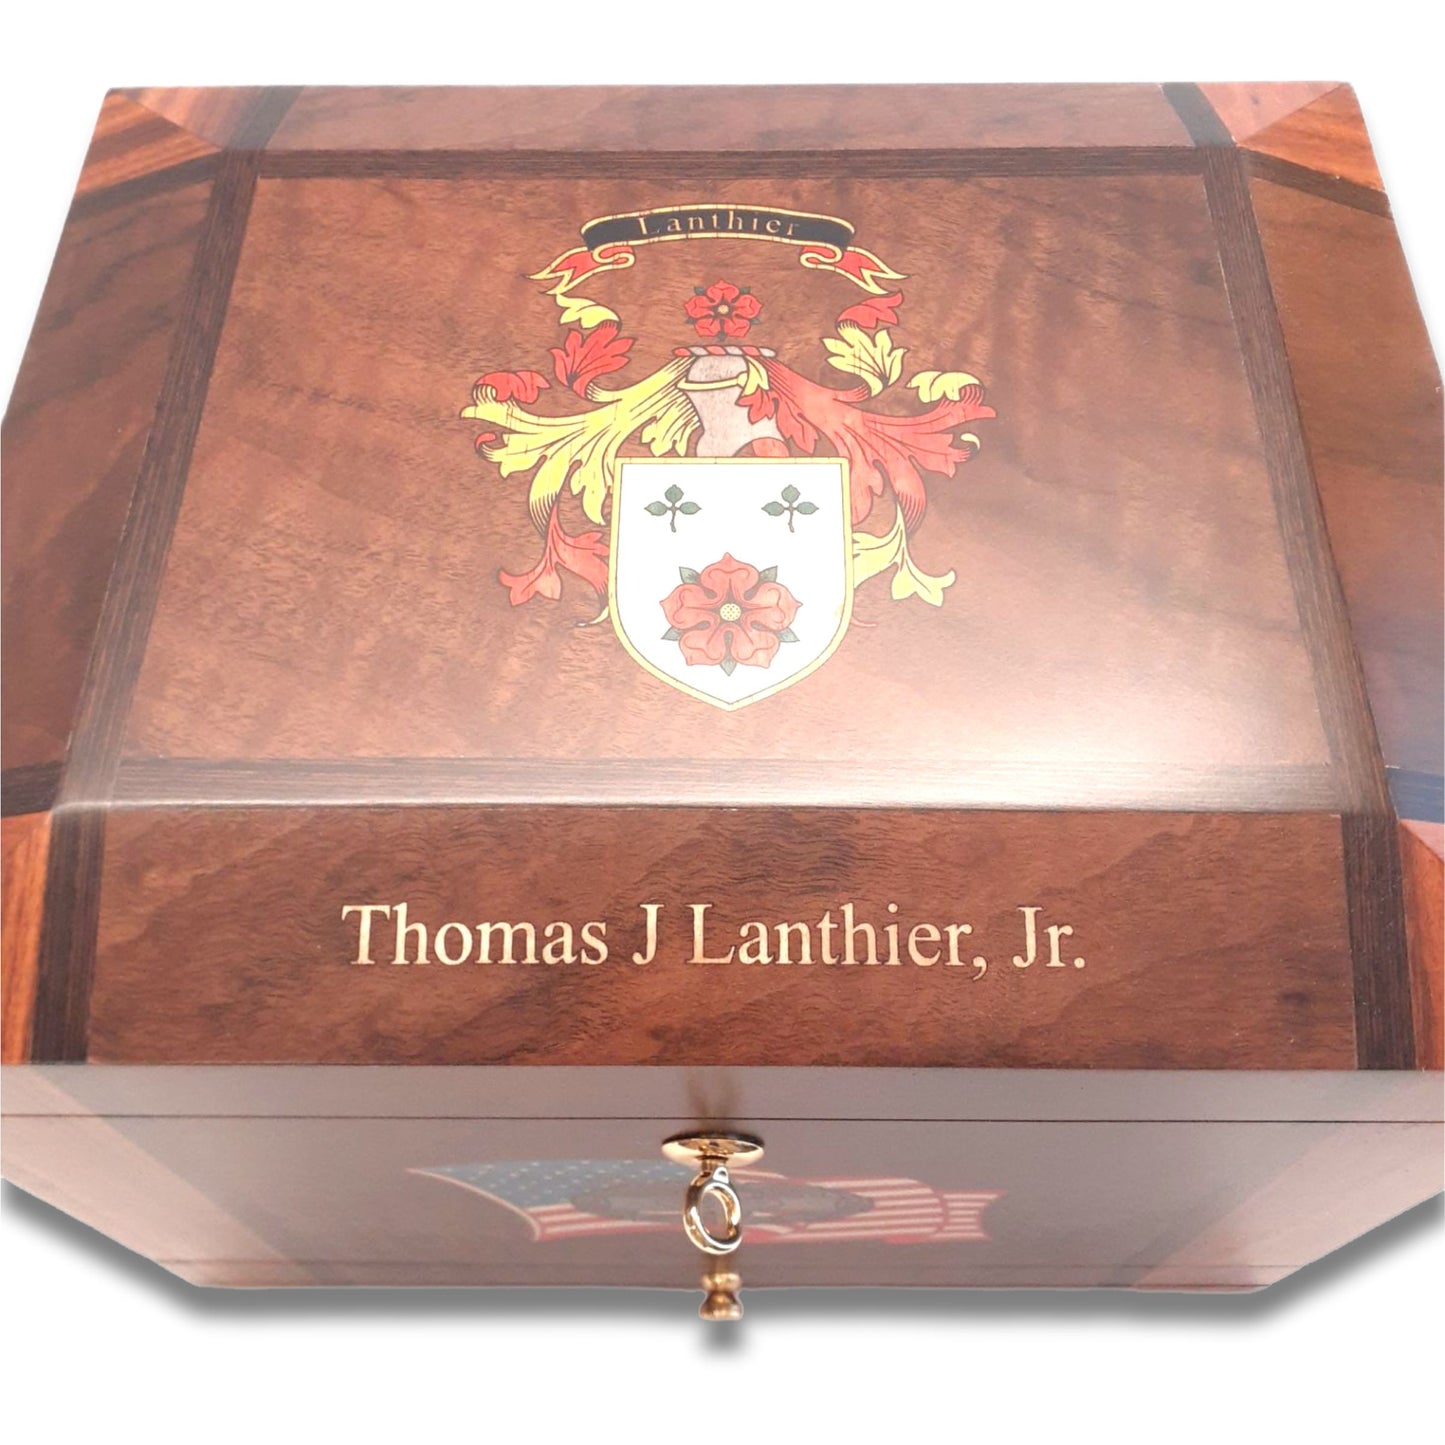 75-Count  Custom Humidor with family crest (Two-Toned Finish, and Drawer)  Made in the U.S.